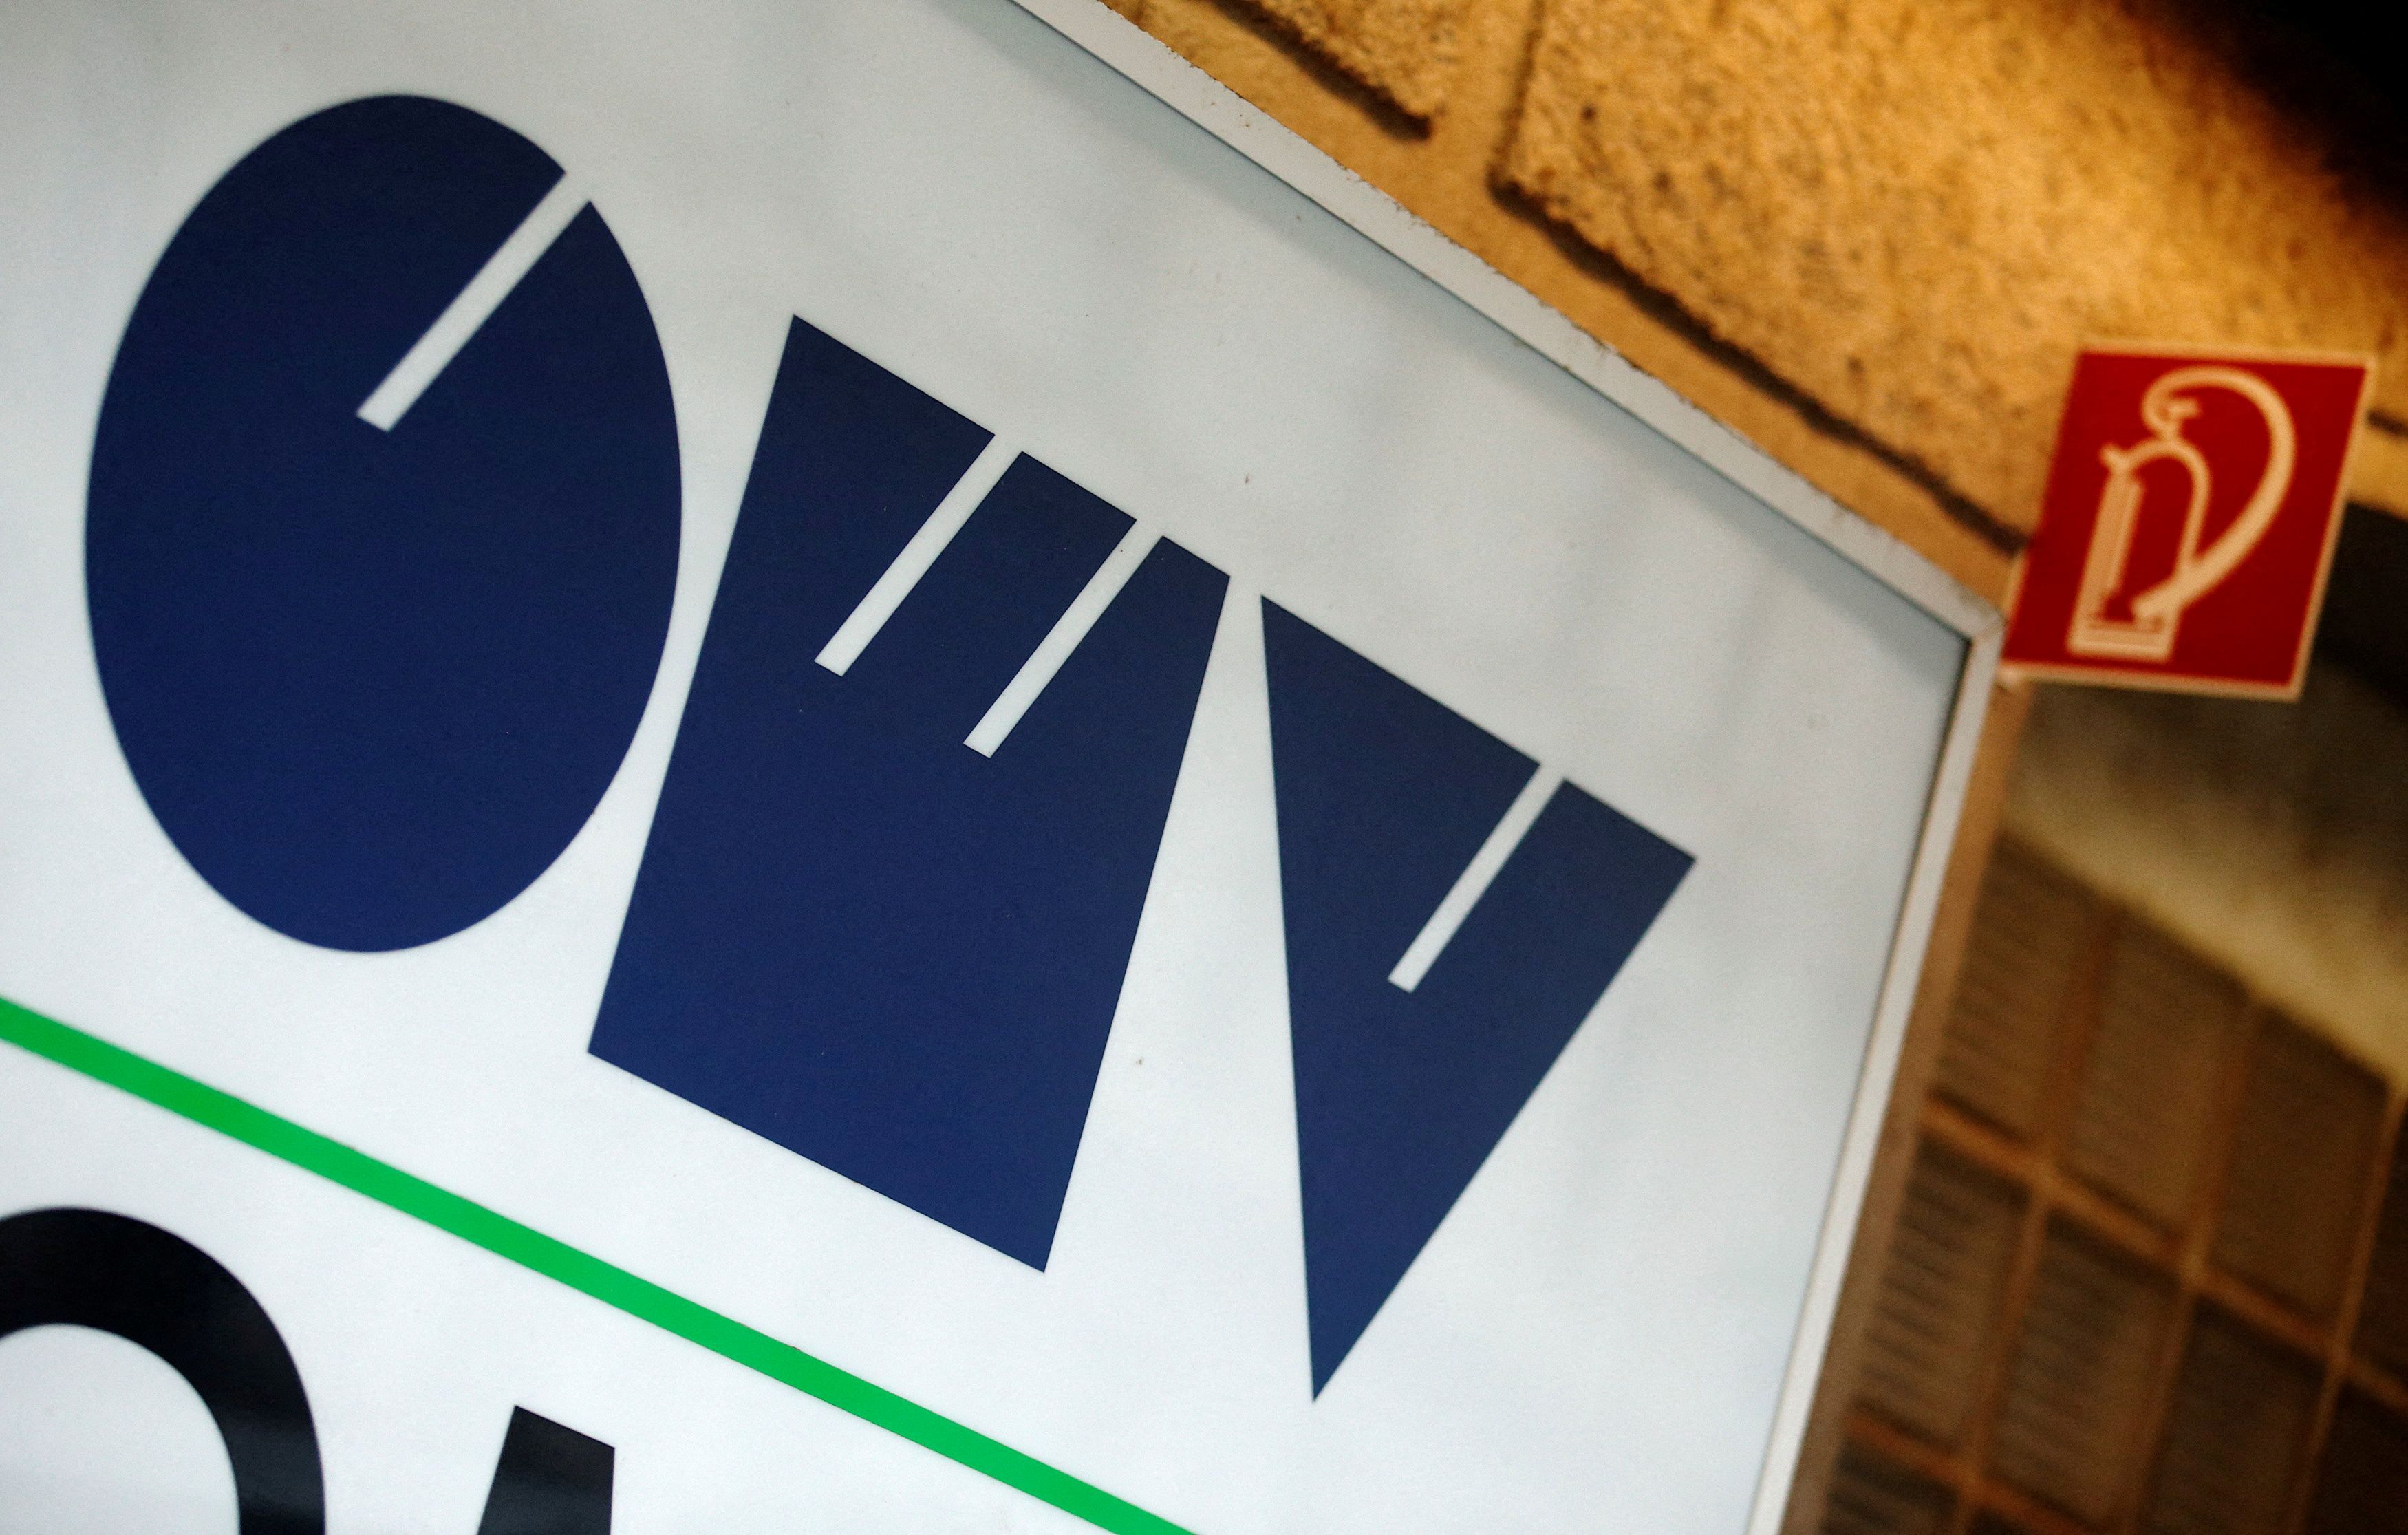 The logo of Austrian oil and gas group OMV is pictured at a gas station in Vienna, Austria